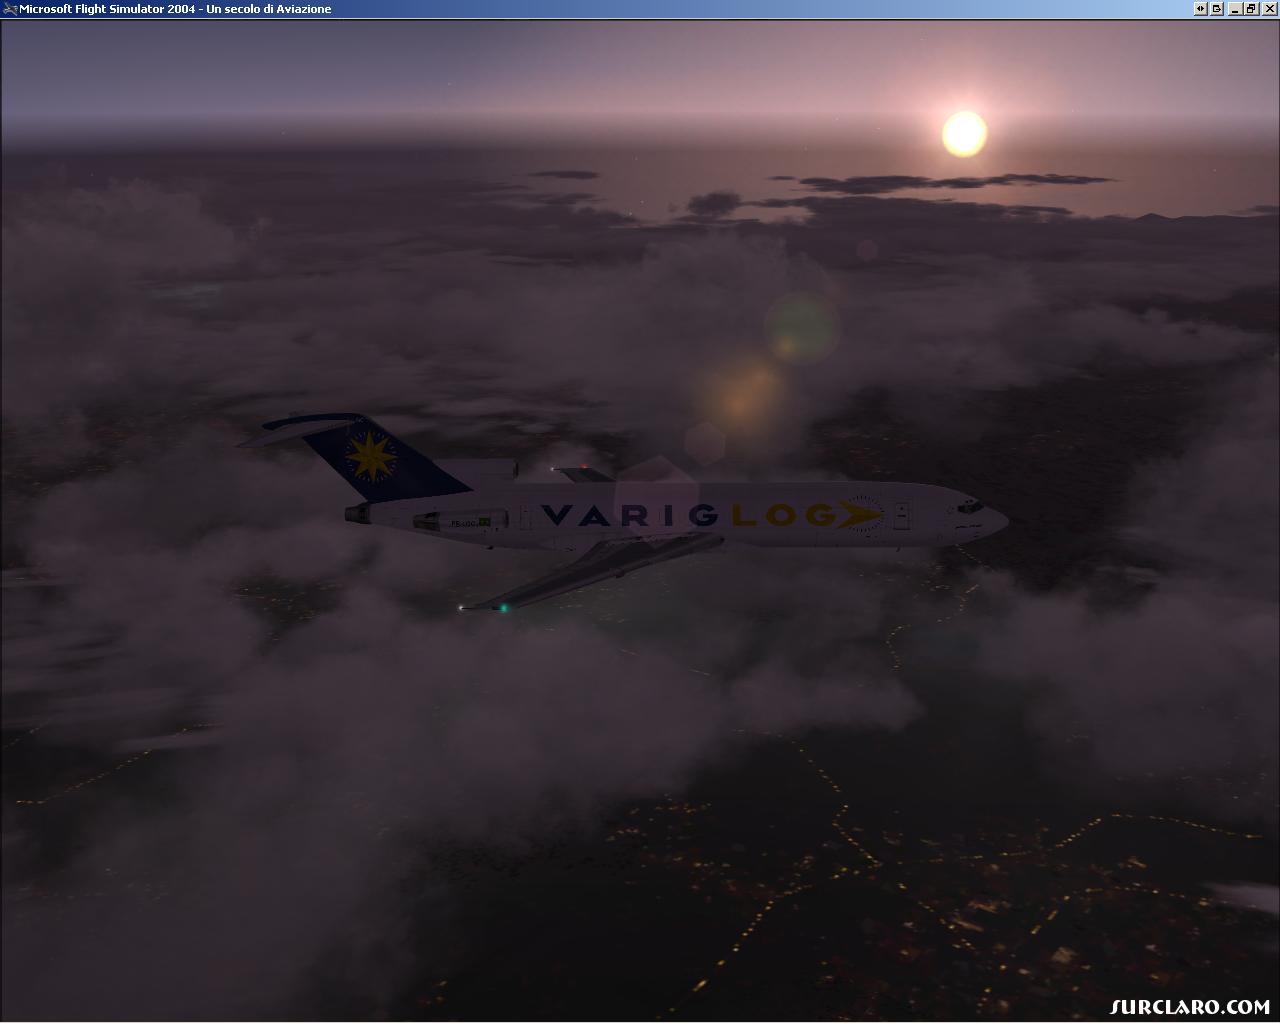 somewhere over Palermo, Italy... at FL320. about to start descent into LMML (Malta) - Photo 15469